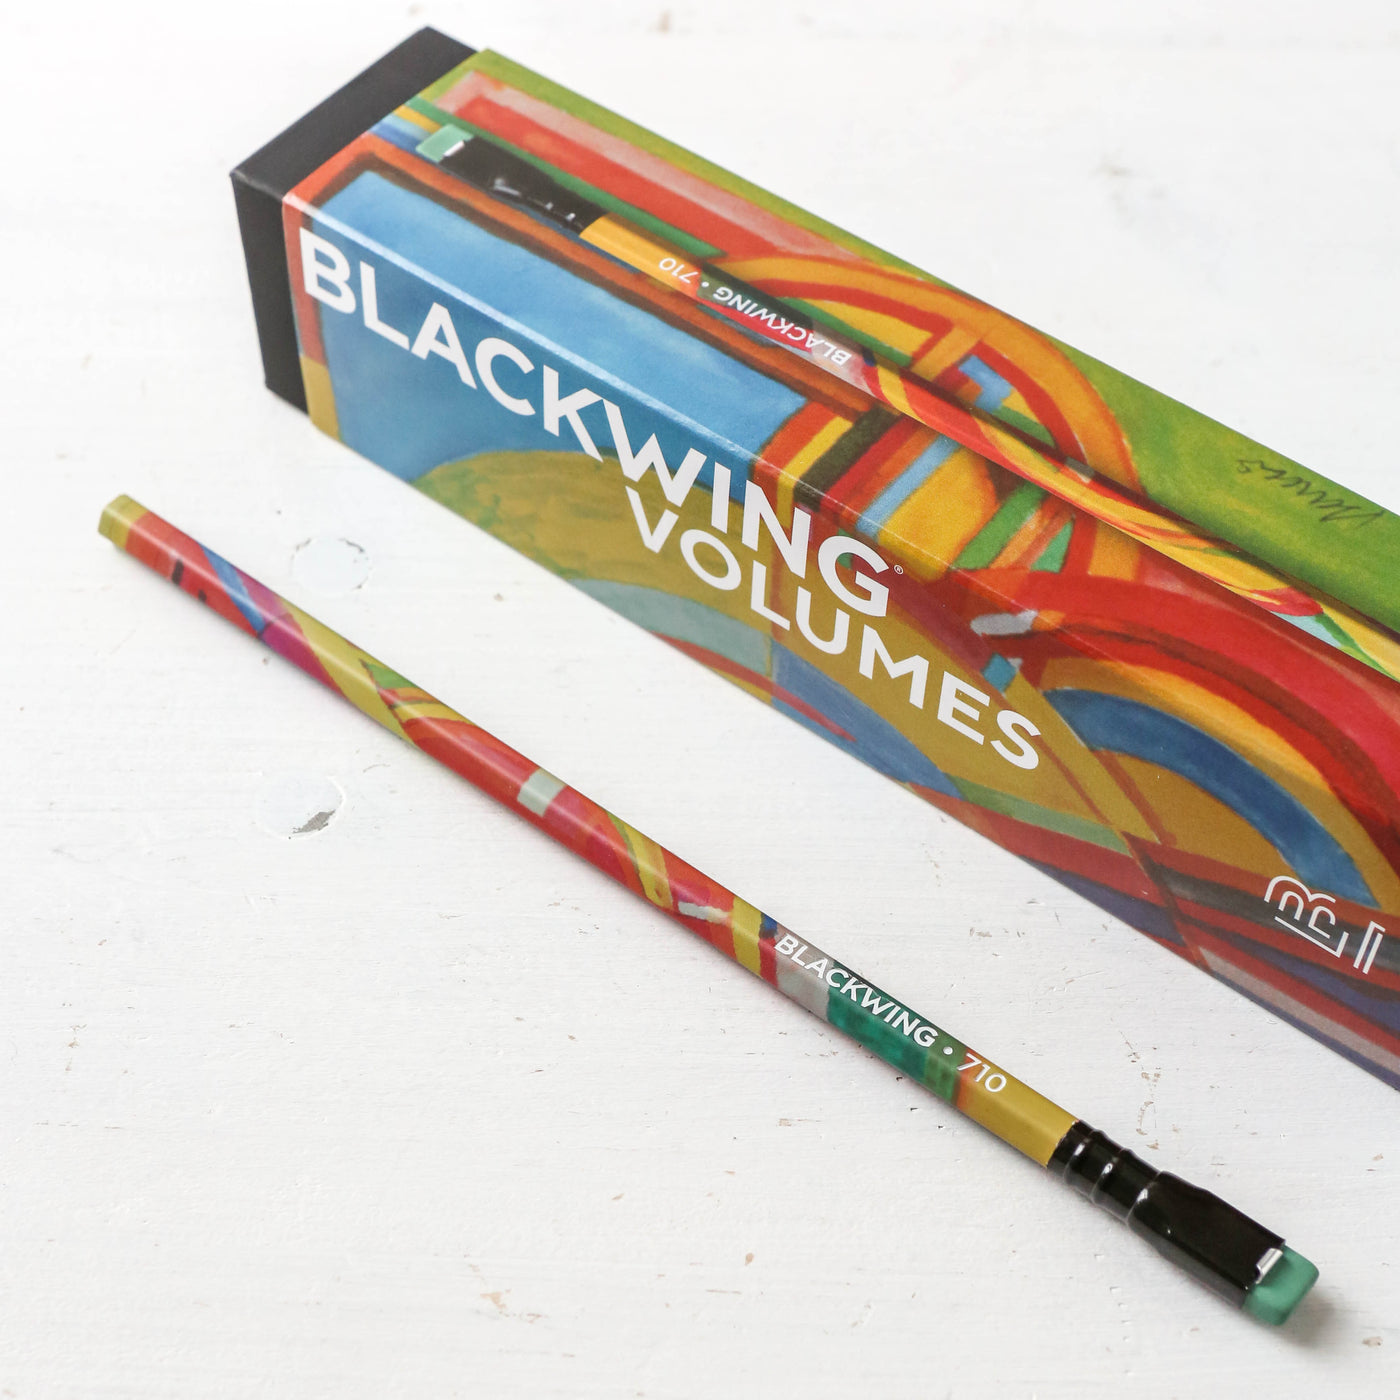 Blackwing Limited Edition Volume 710 - Box of 12 Pencils